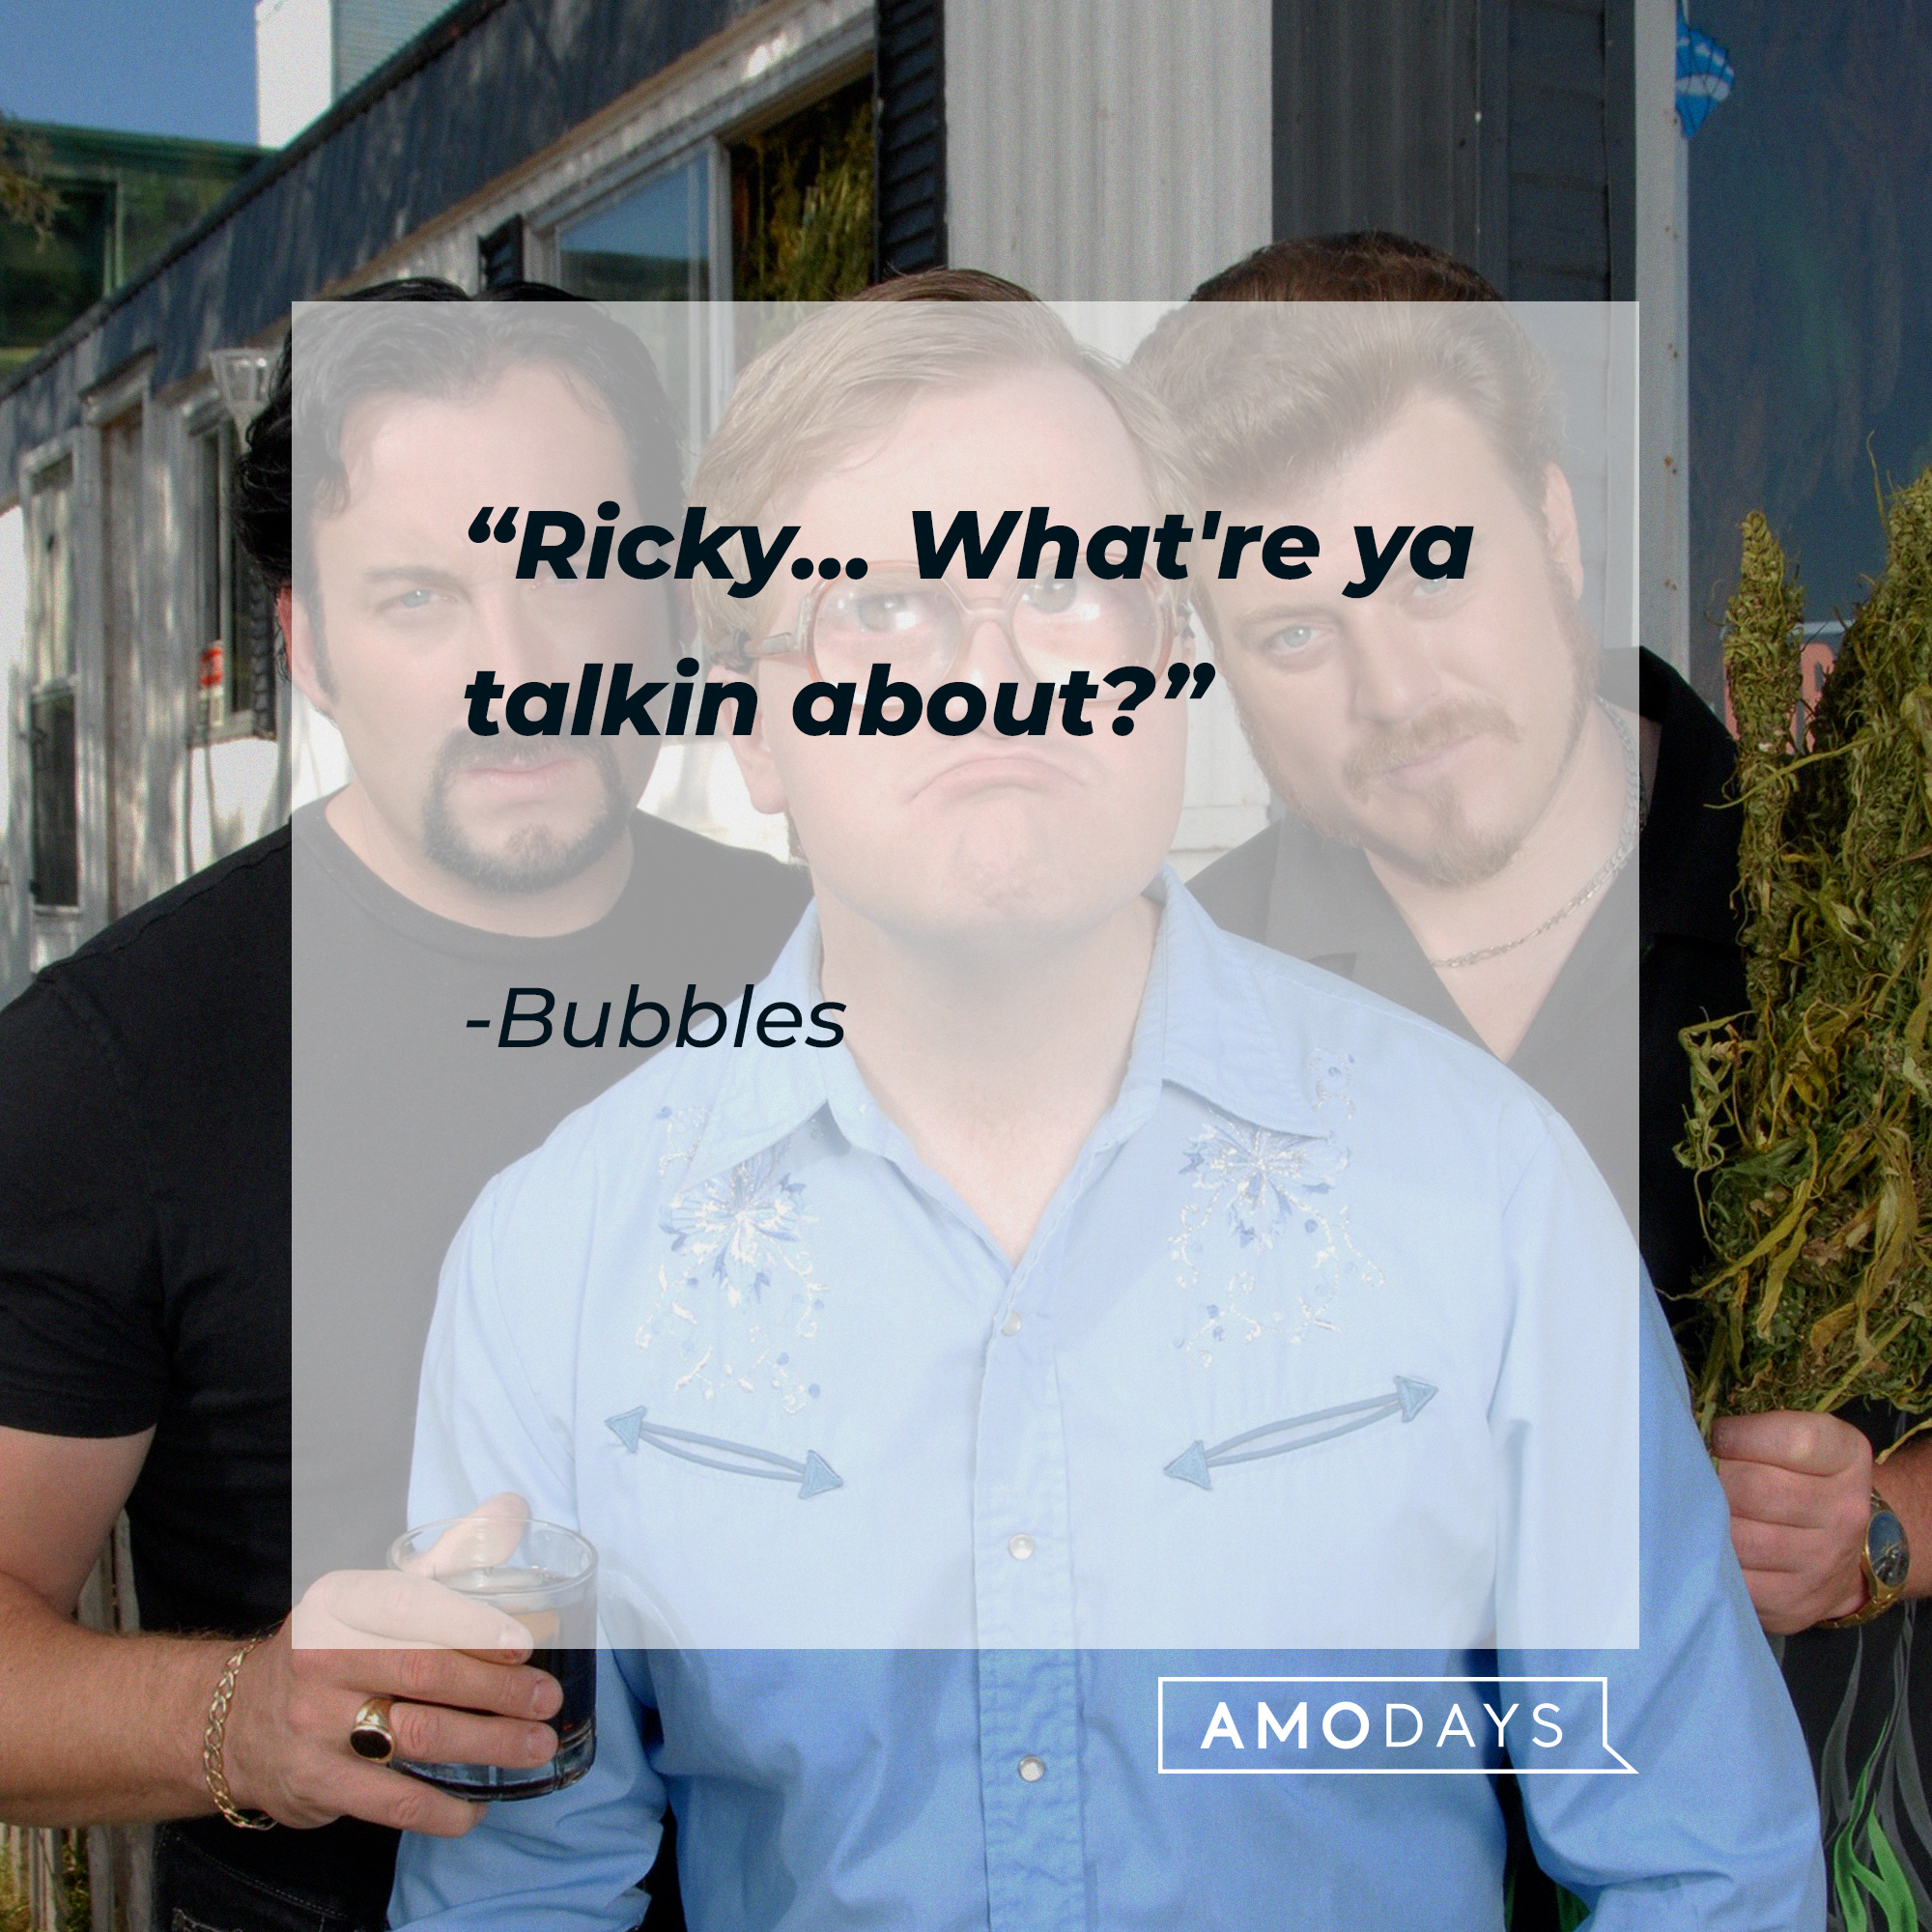 Bubbles's quote: "Ricky... What're ya talkin about?" | Source: facebook.com/trailerparkboys